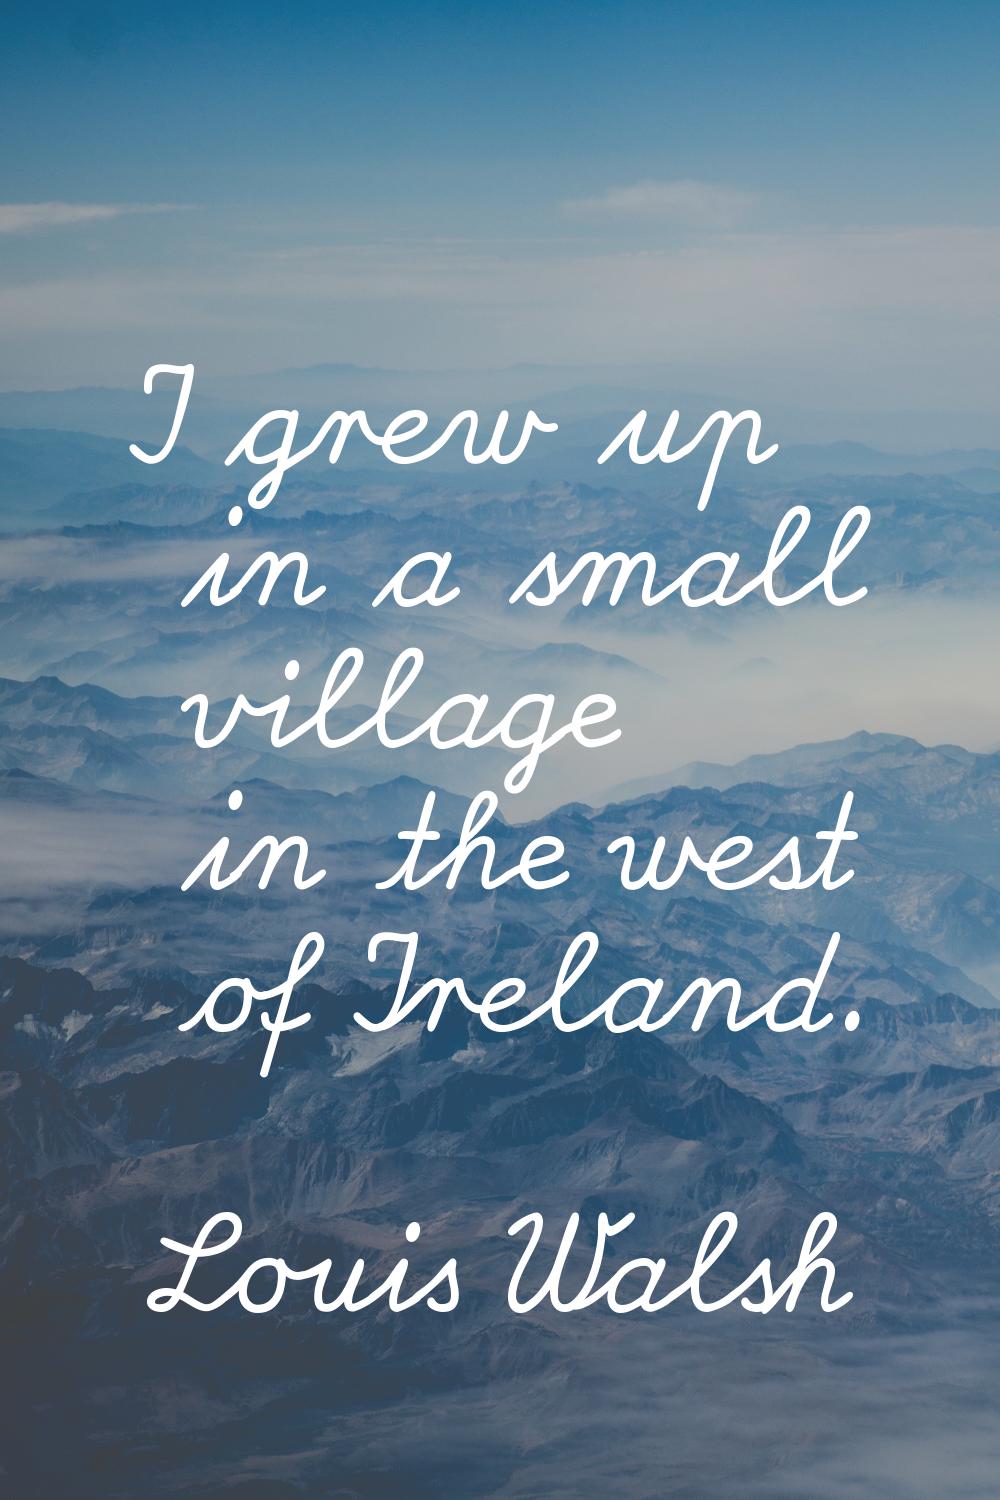 I grew up in a small village in the west of Ireland.